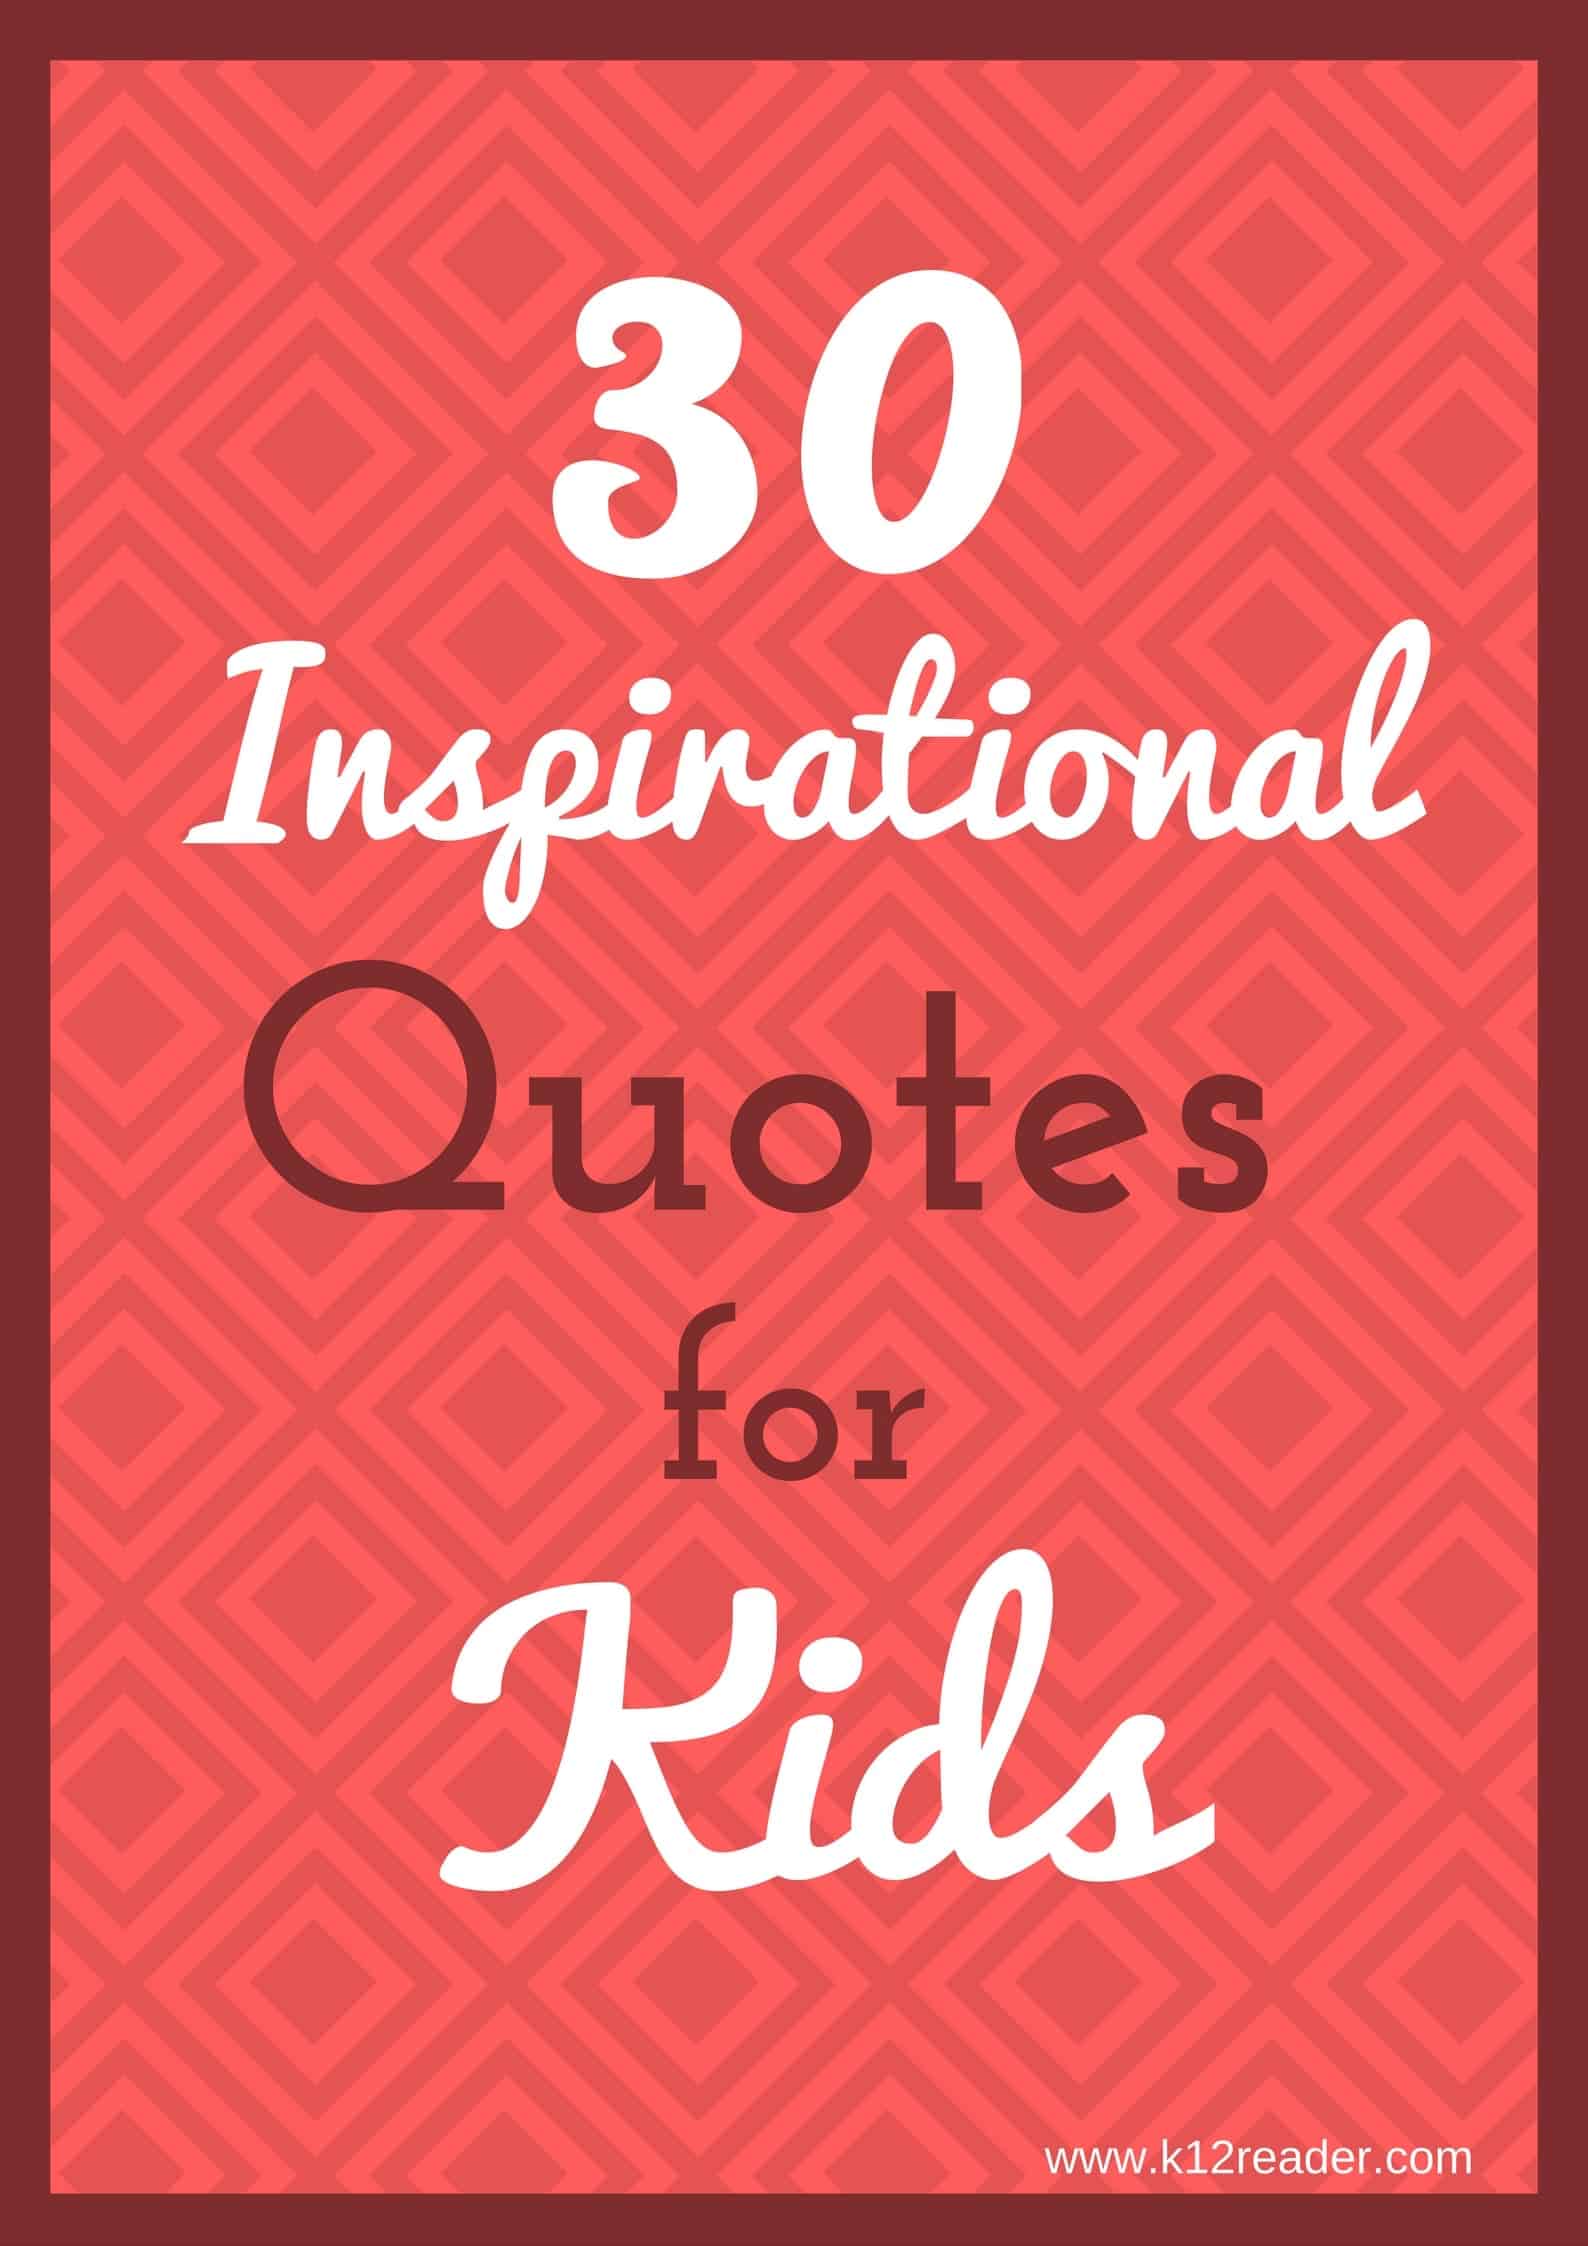 inspirational quotes for elementary students